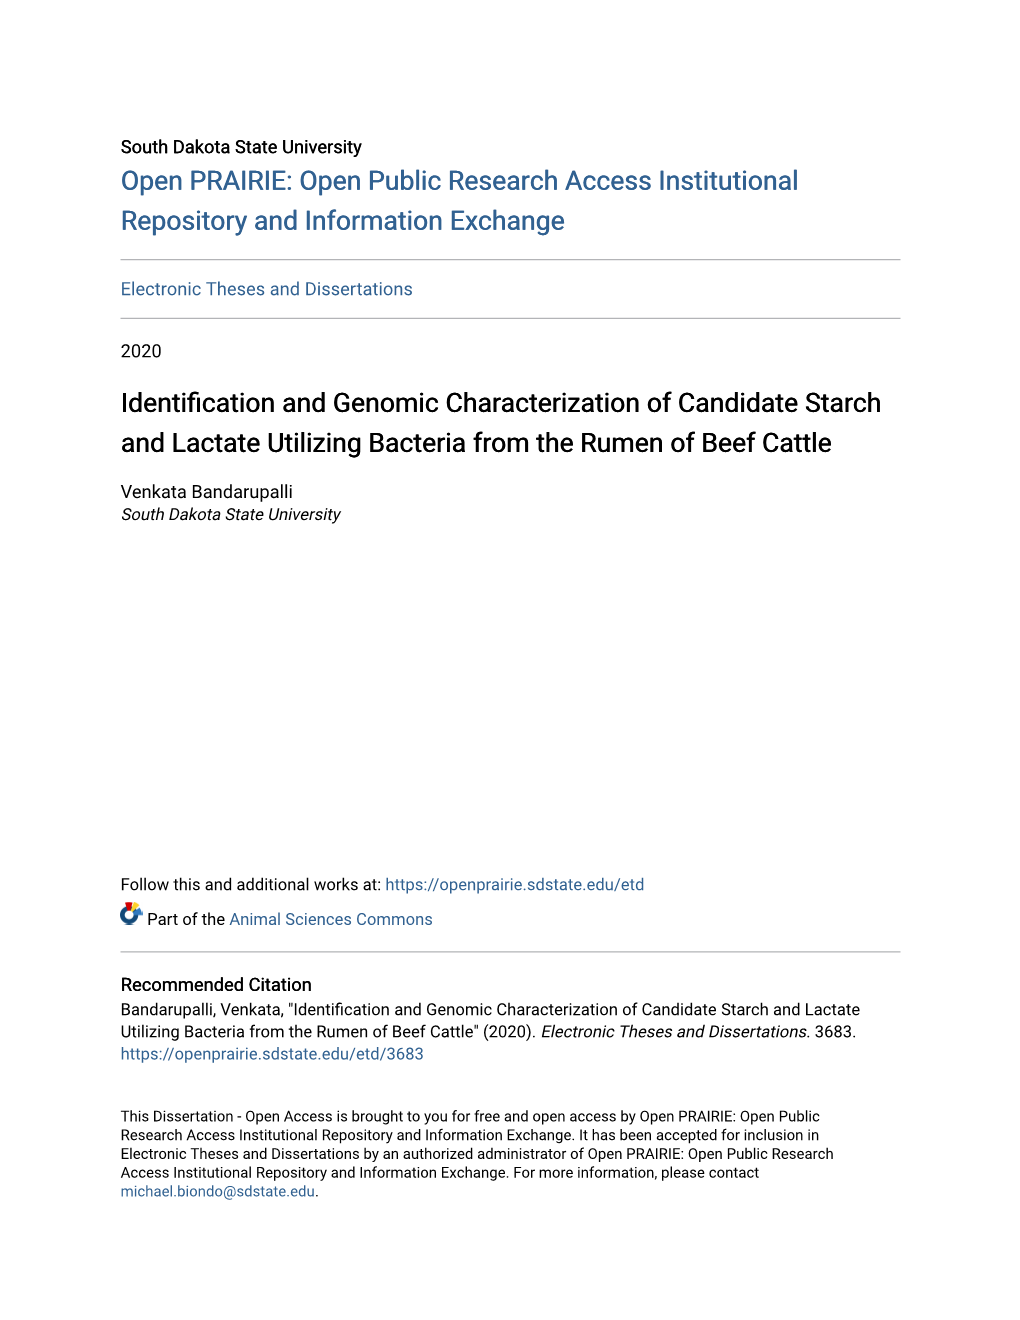 Identification and Genomic Characterization of Candidate Starch and Lactate Utilizing Bacteria from the Rumen of Beef Cattle